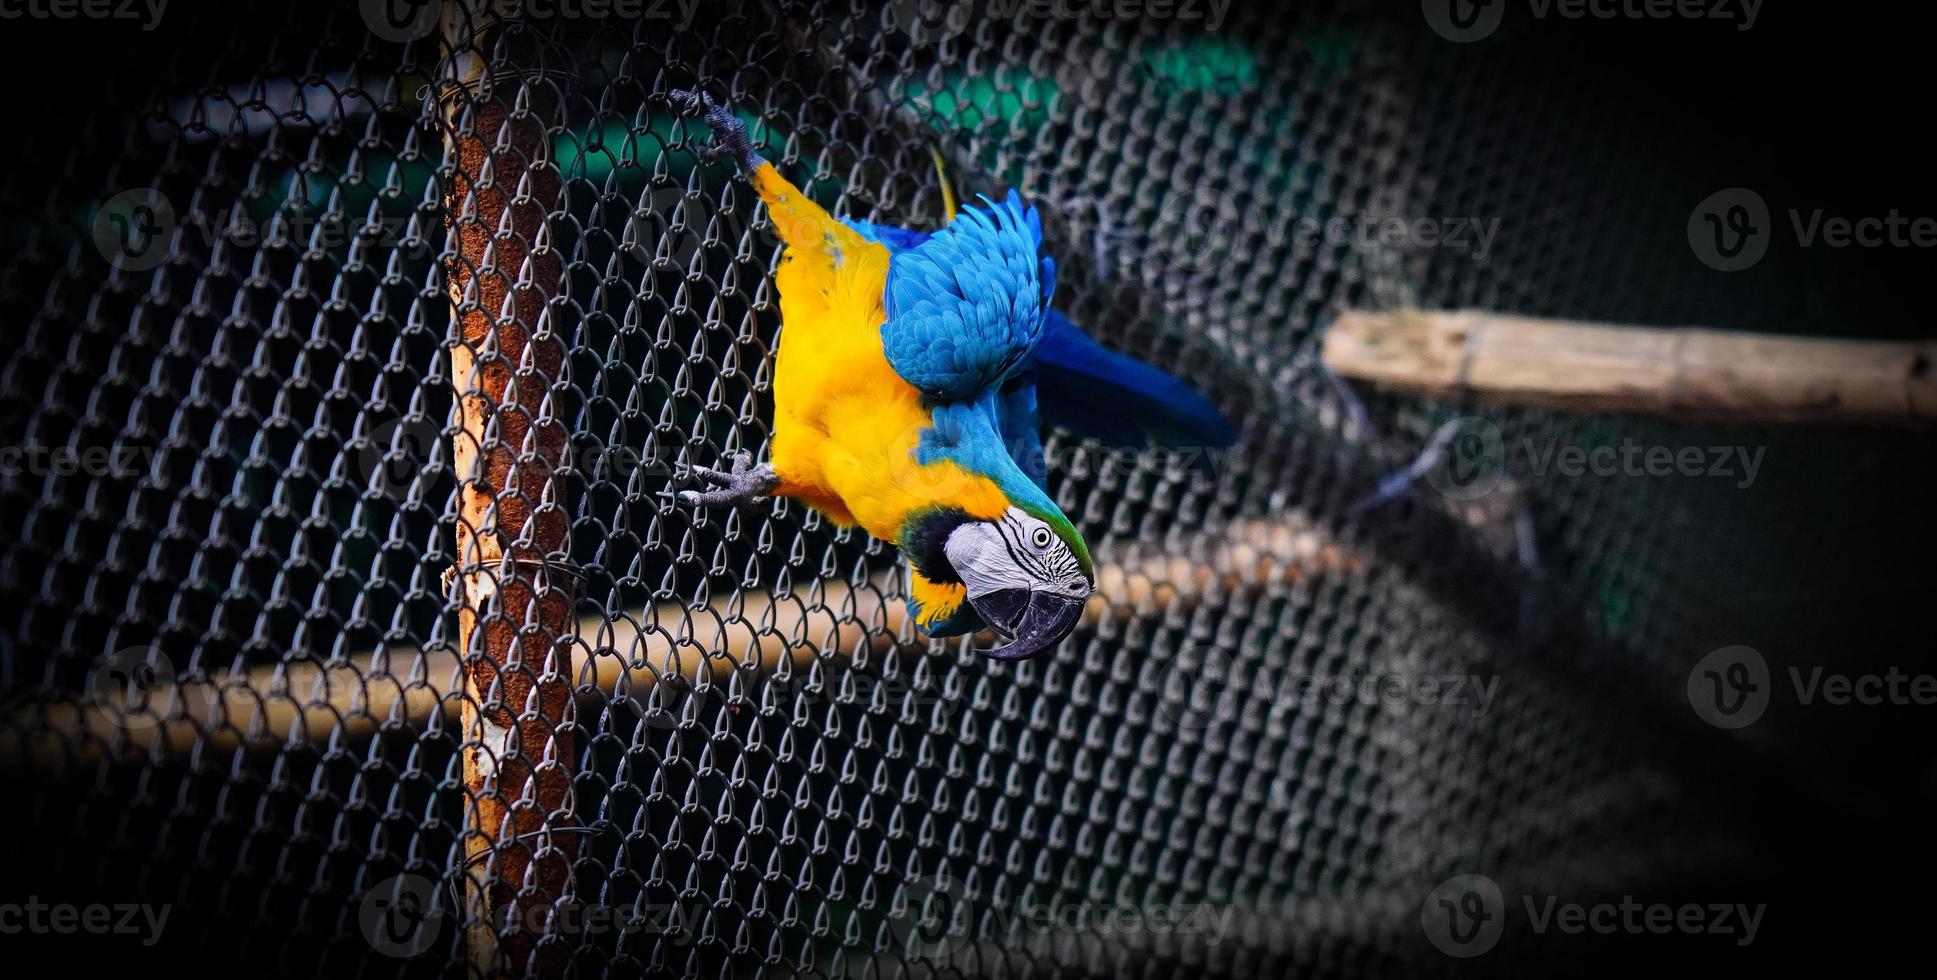 The blue-and-yellow macaw in stylish pose photo